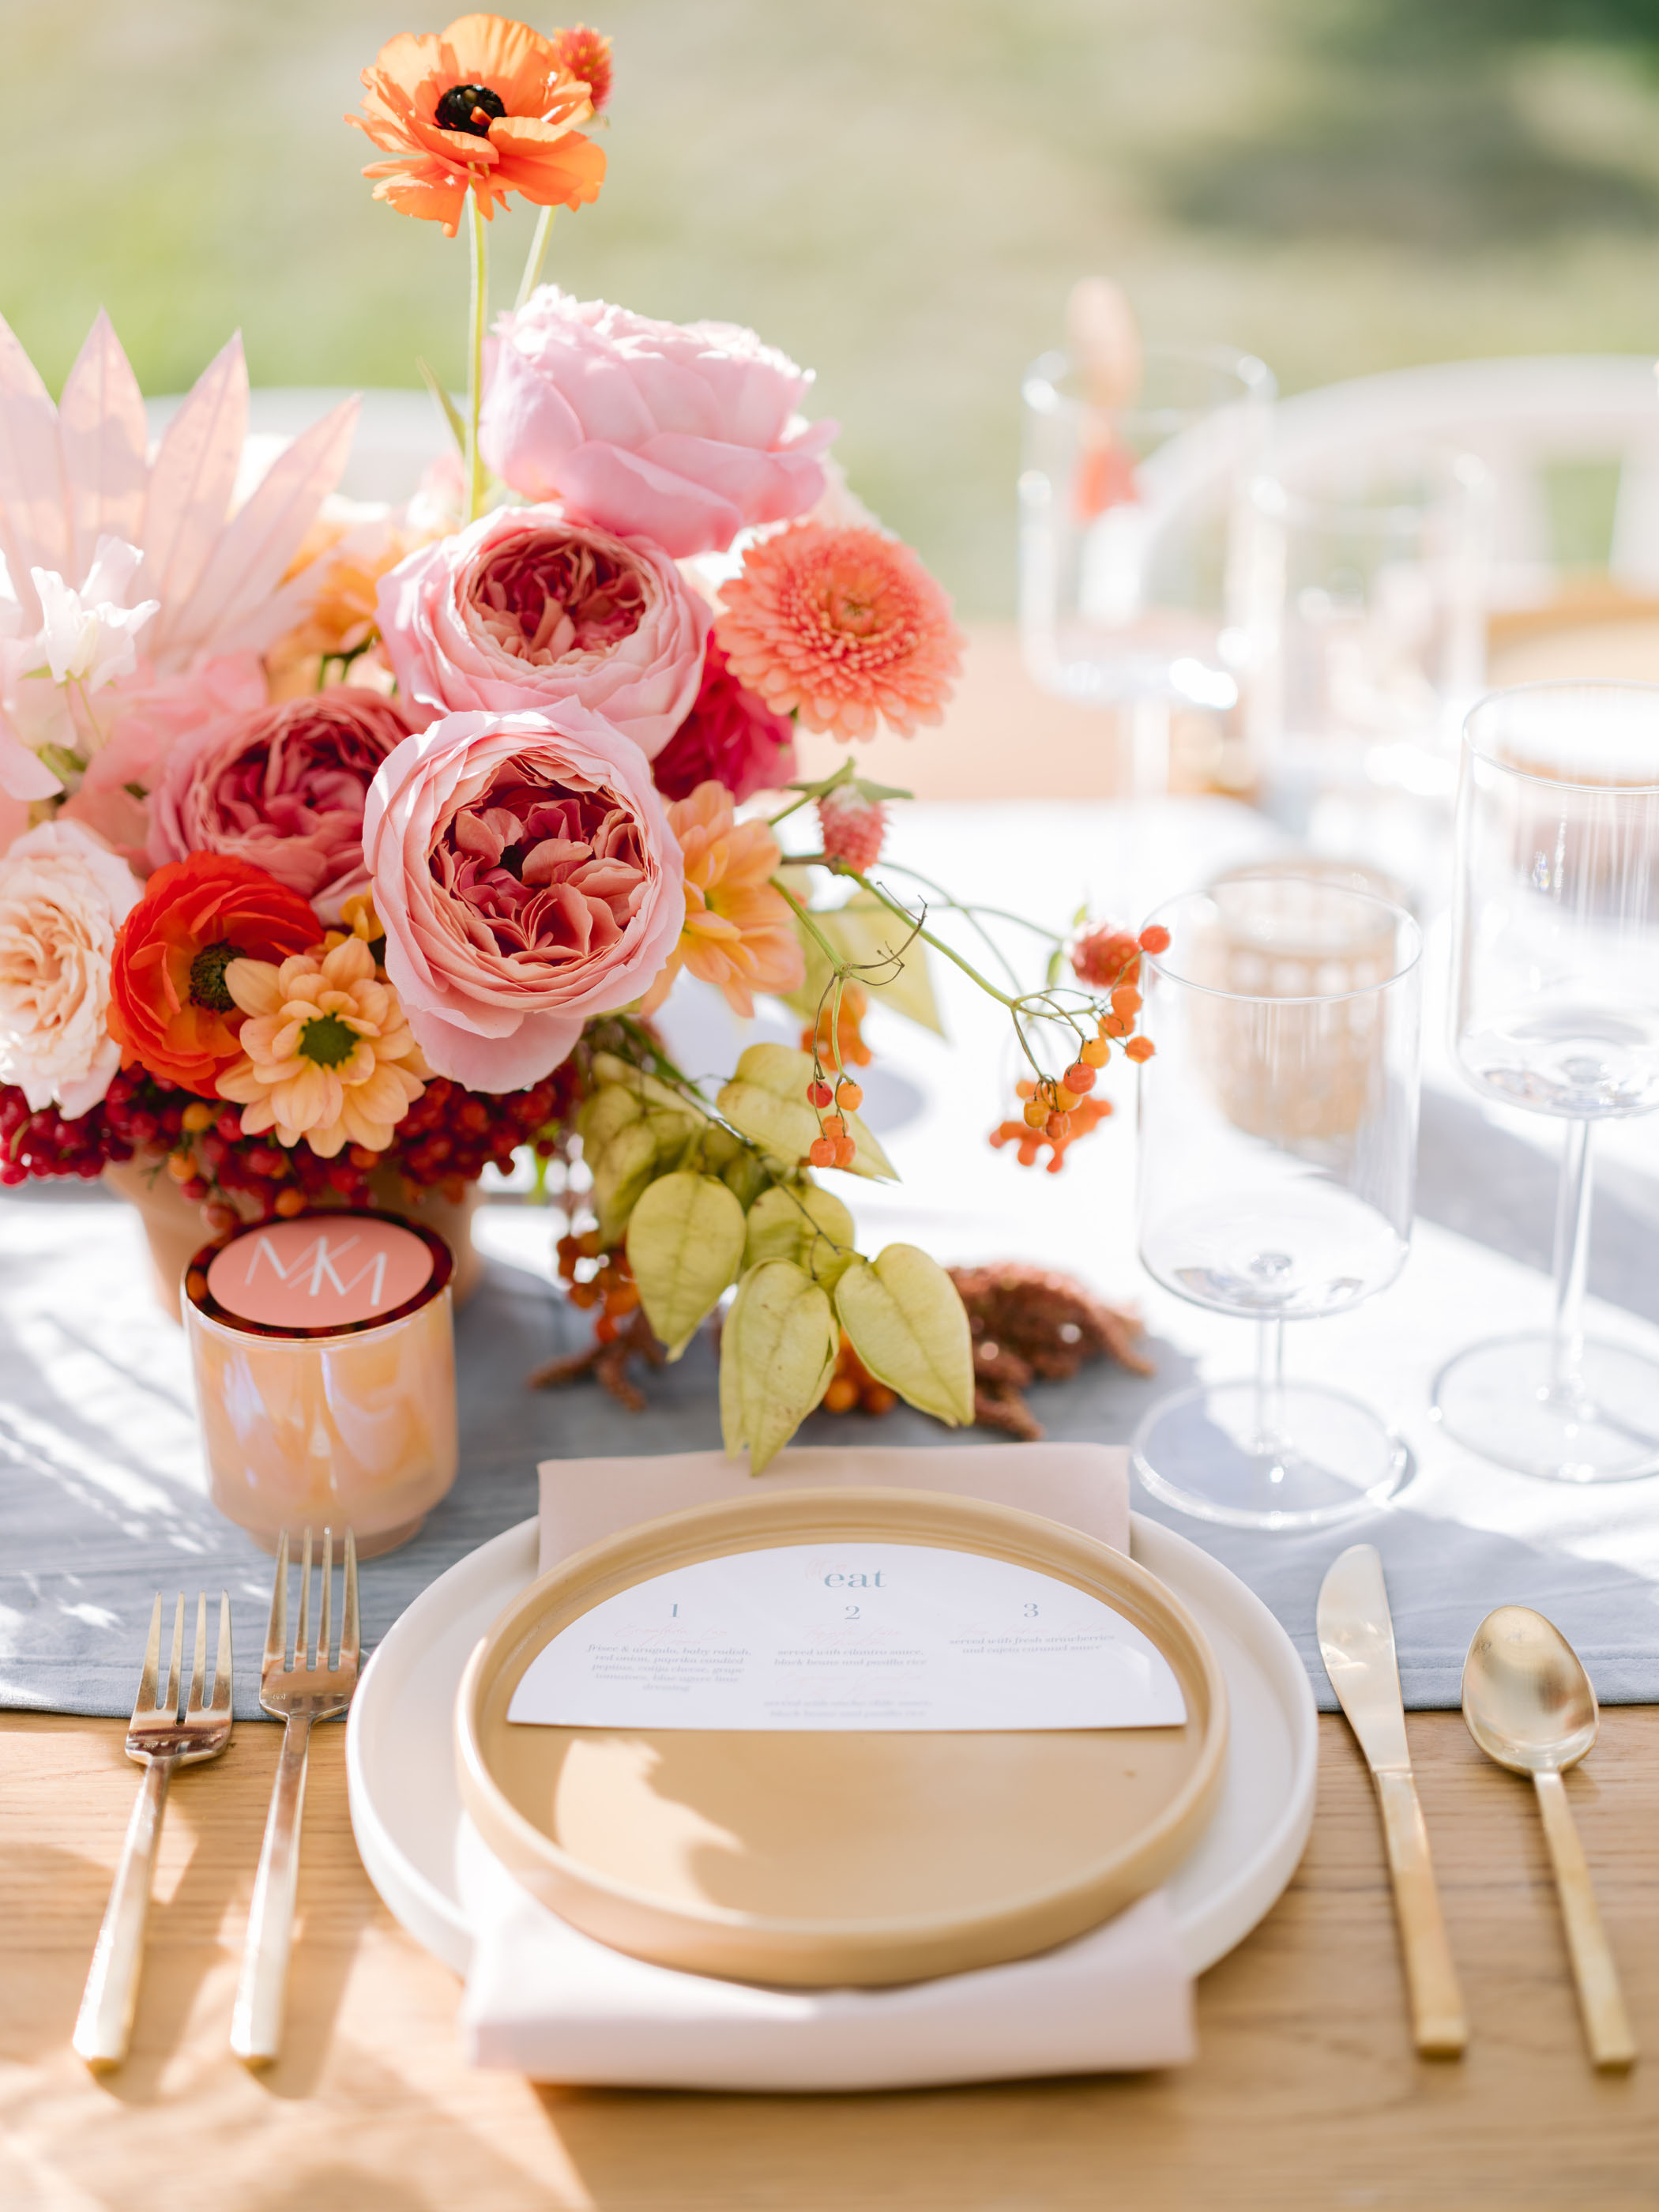 Pink floral centerpiece display for housewarming party table